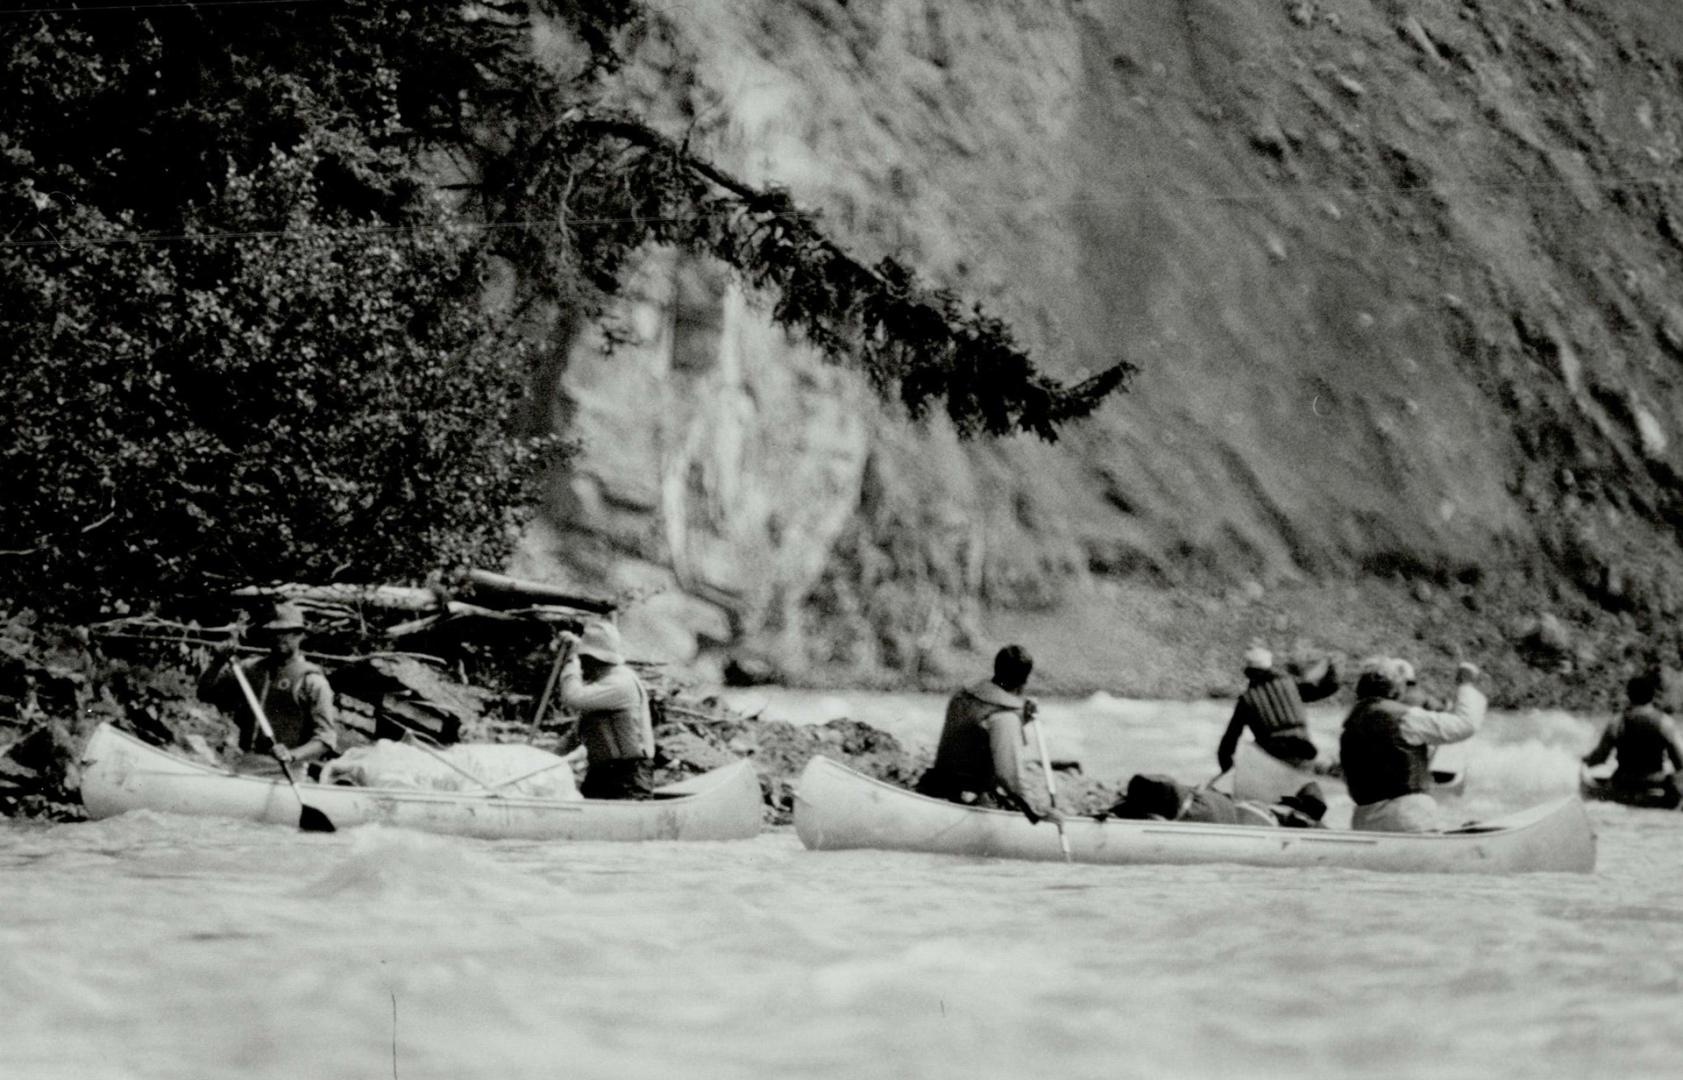 Prince Andrew handles his canoe on the Nahanni River during his wilderness trip